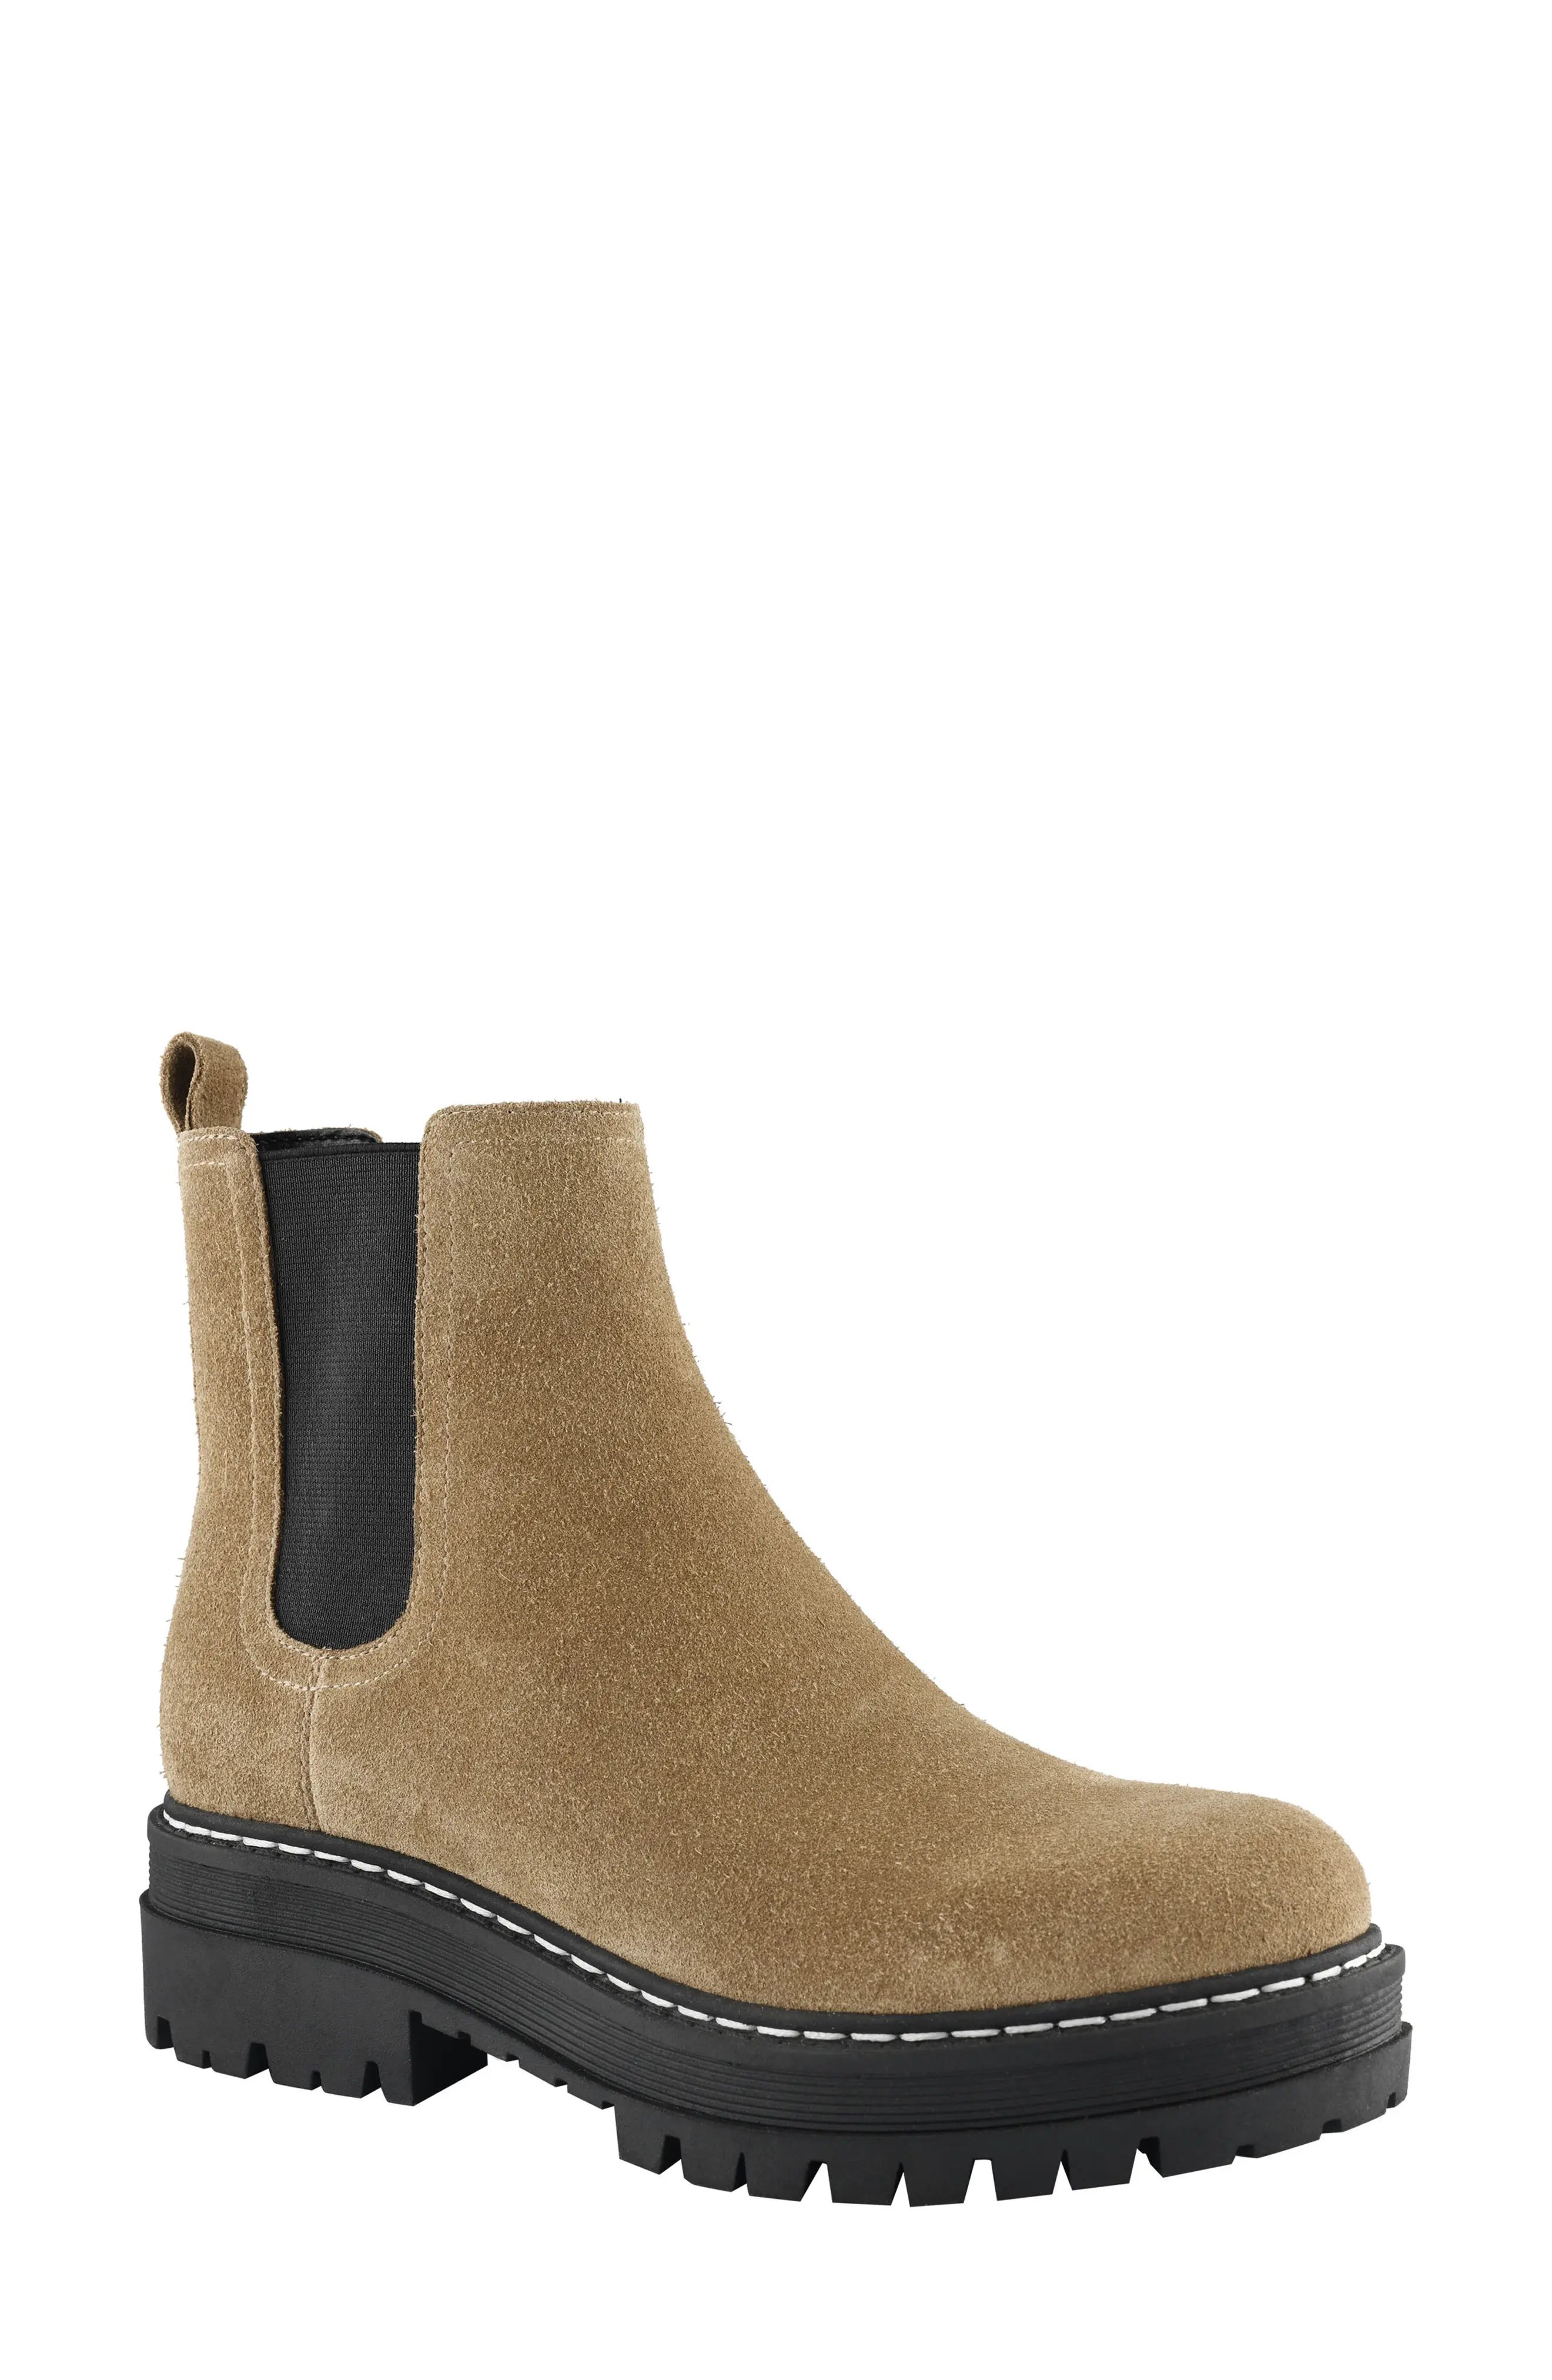 Marc Fisher LTD Padmia Chelsea Boot, Size 6.5 in Alice Suede at Nordstrom | Nordstrom